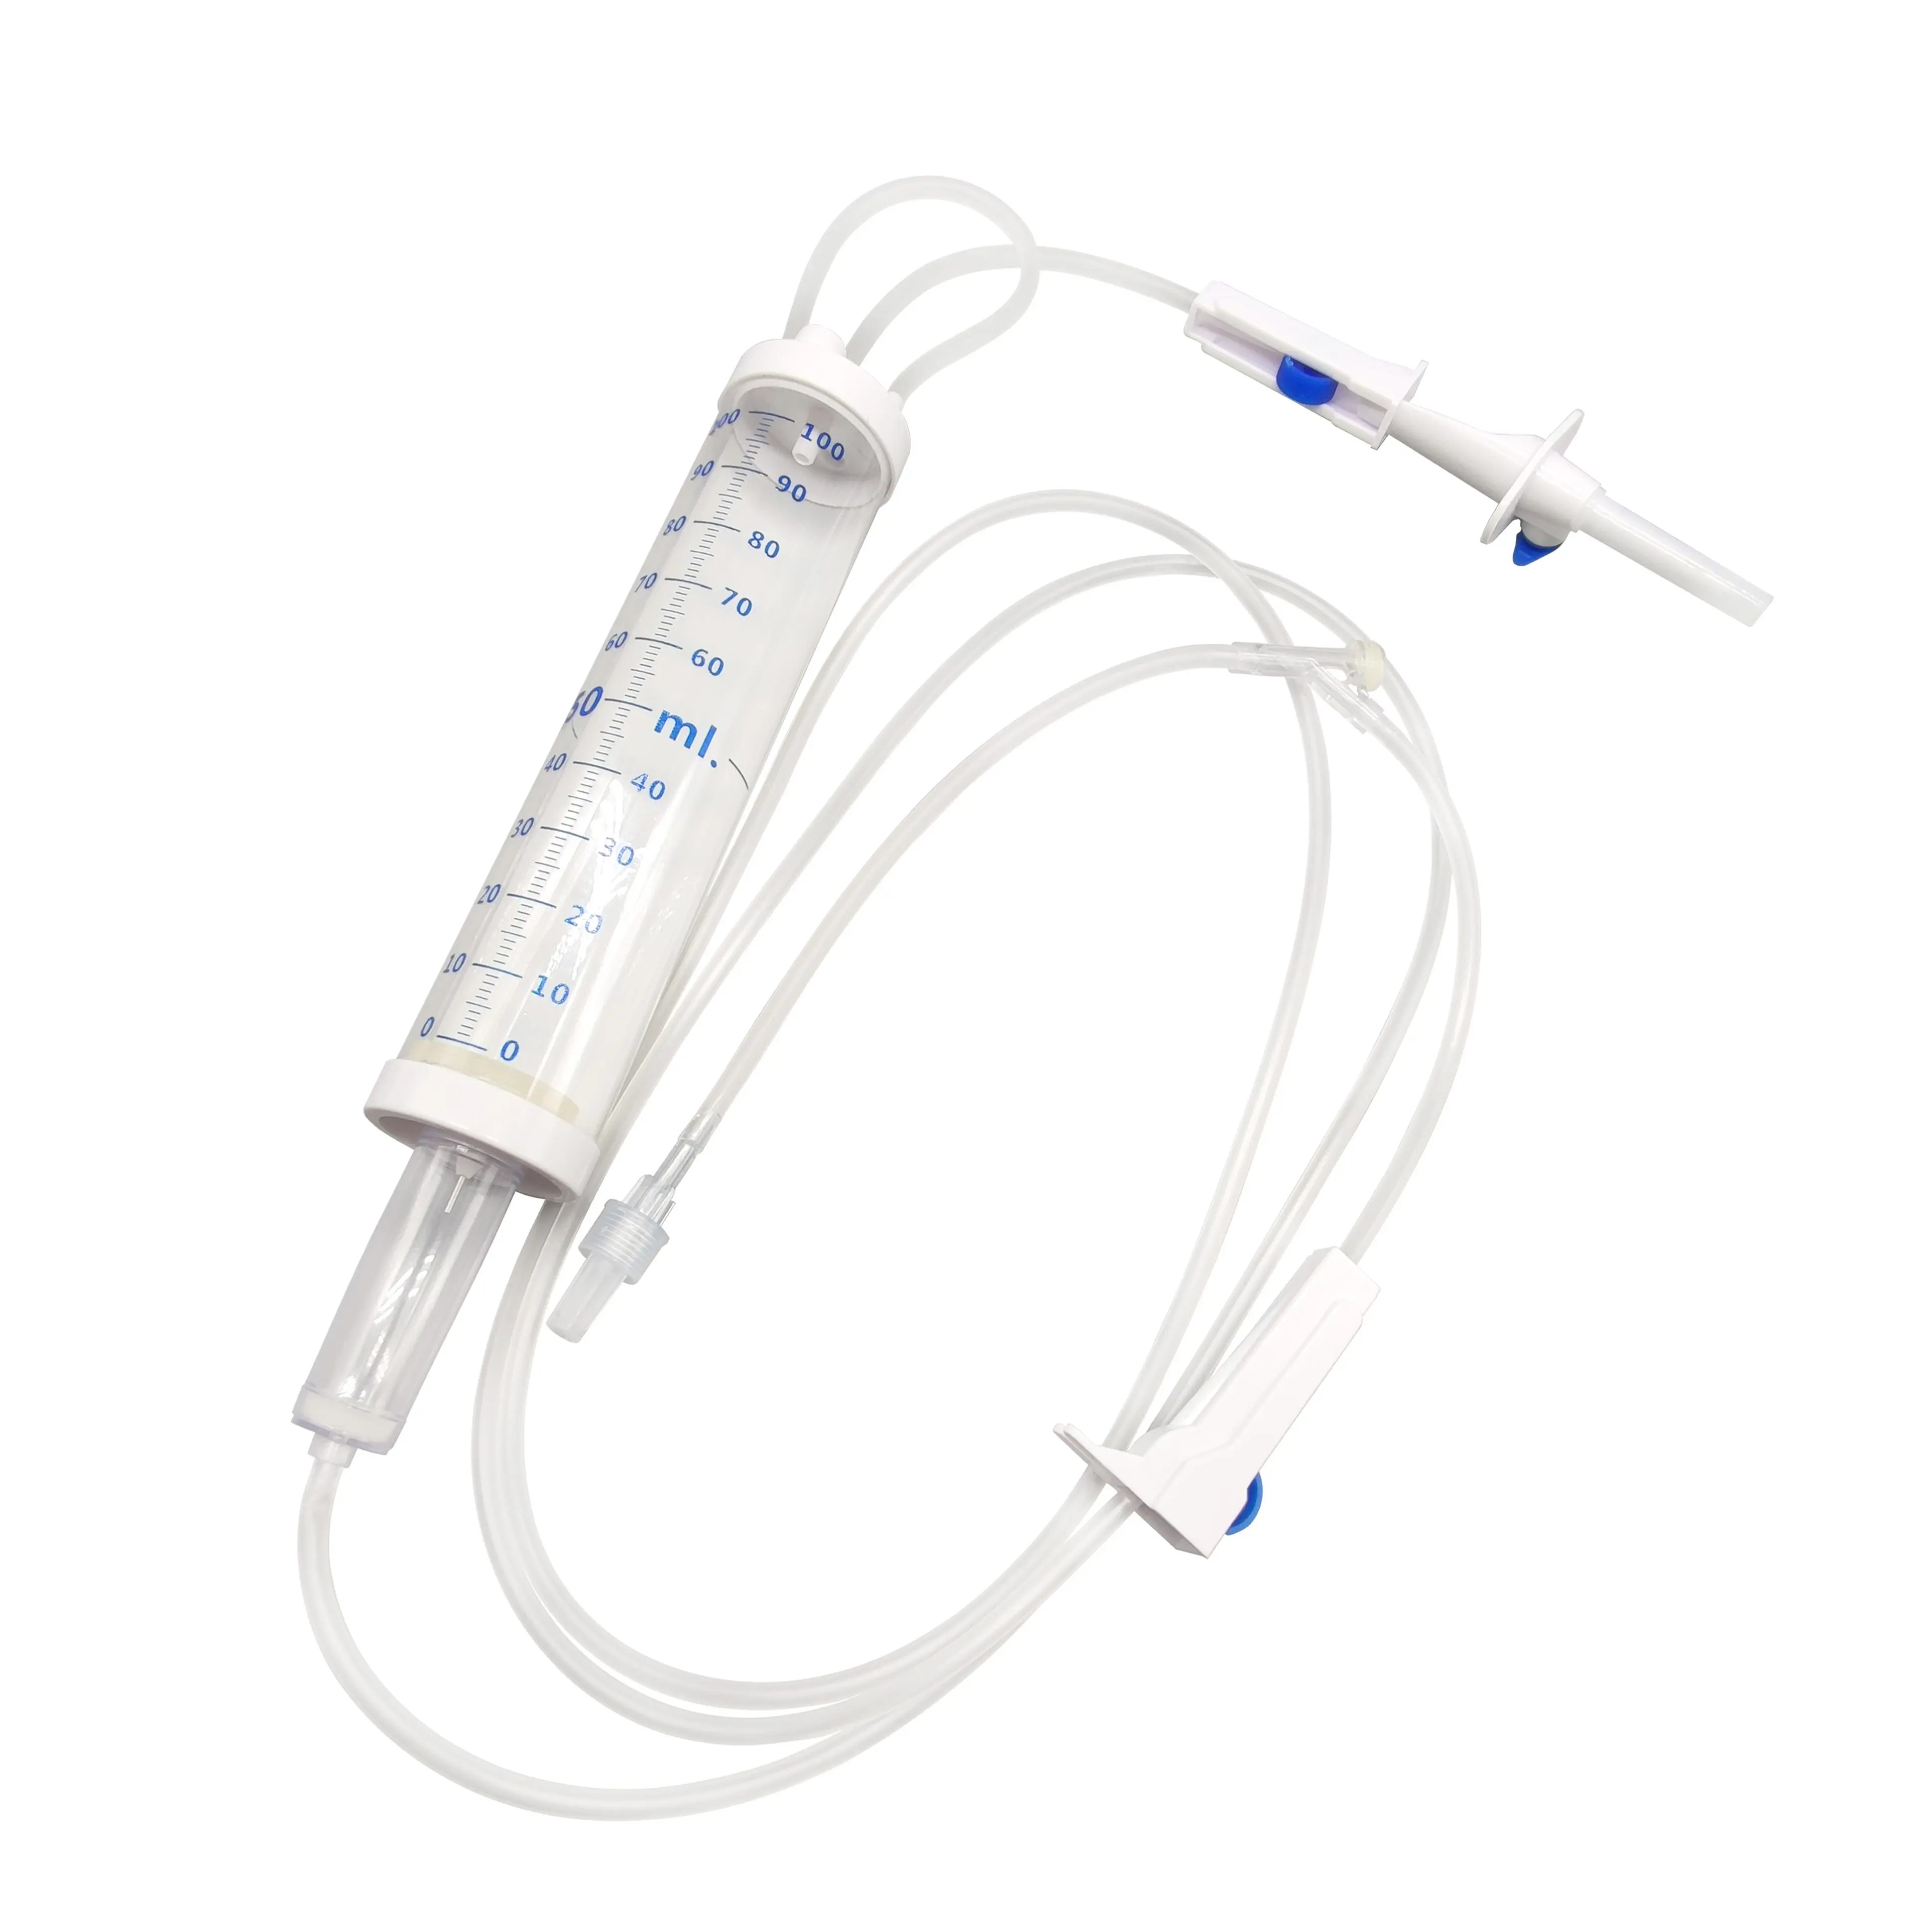 Hot-Selling Infusion Sets with Burretts No Chip Drops Sterile Disposable Set for Solution Infusion for Medical